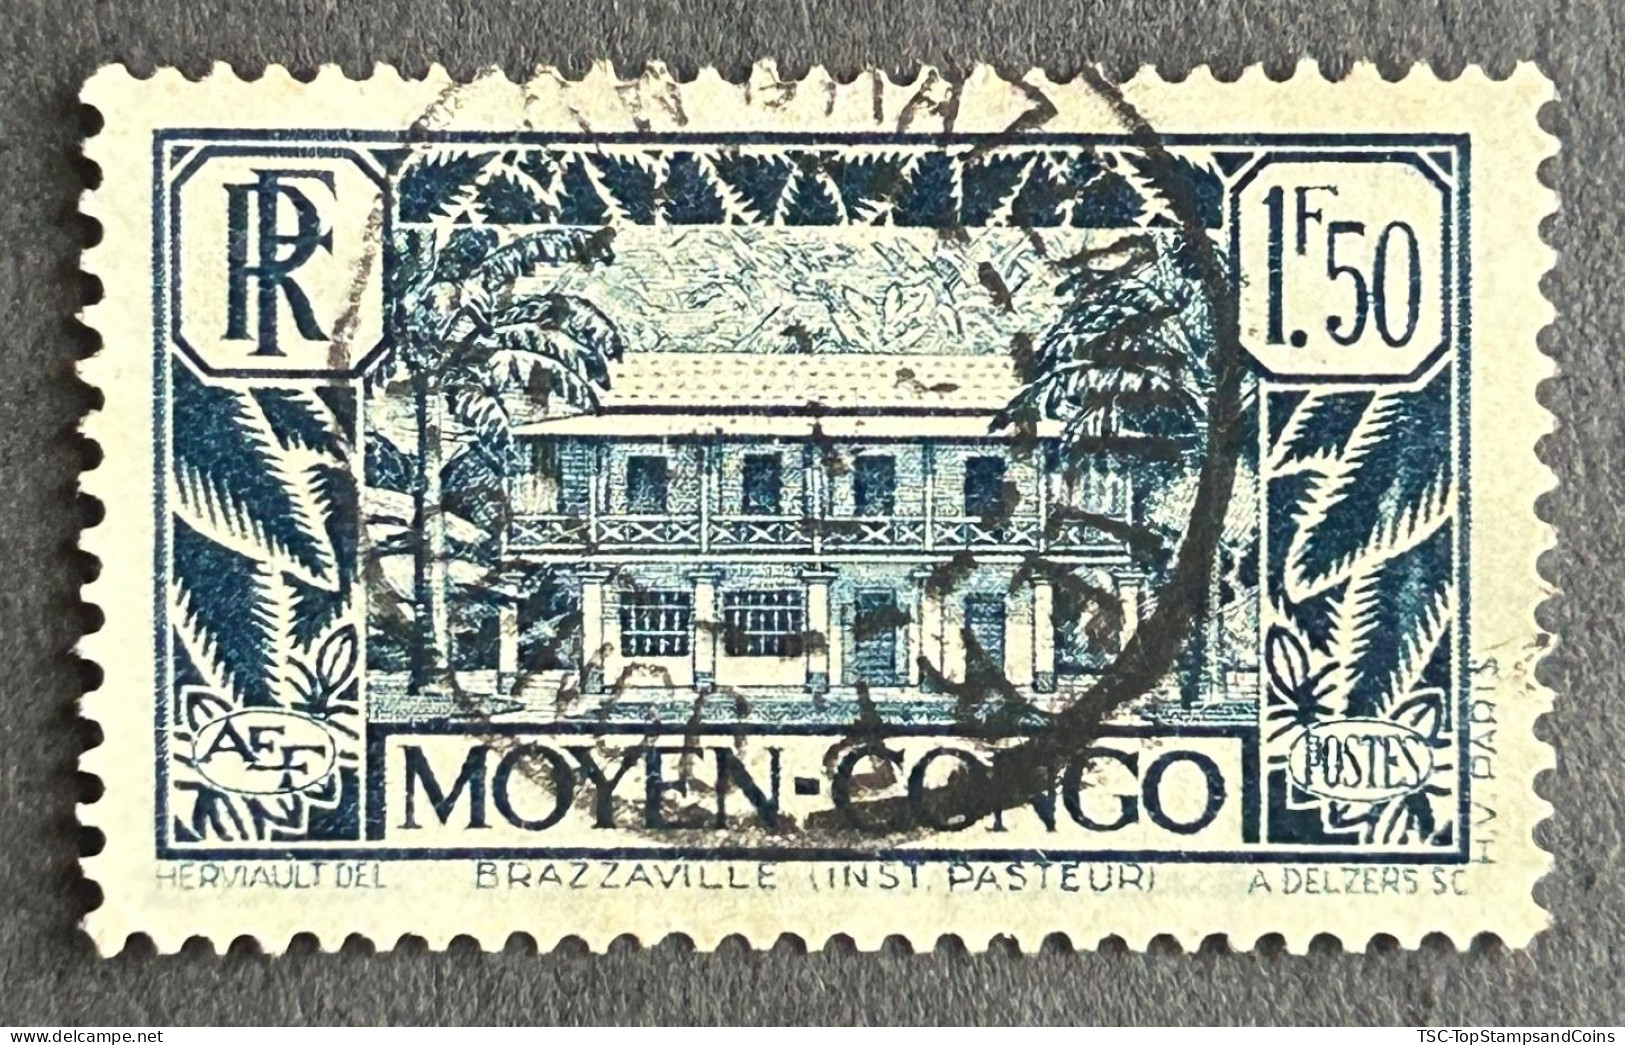 FRCG129U2 - Brazzaville - Pasteur Institute - 1.50 F Used Stamp - Middle Congo - 1933 - Usados